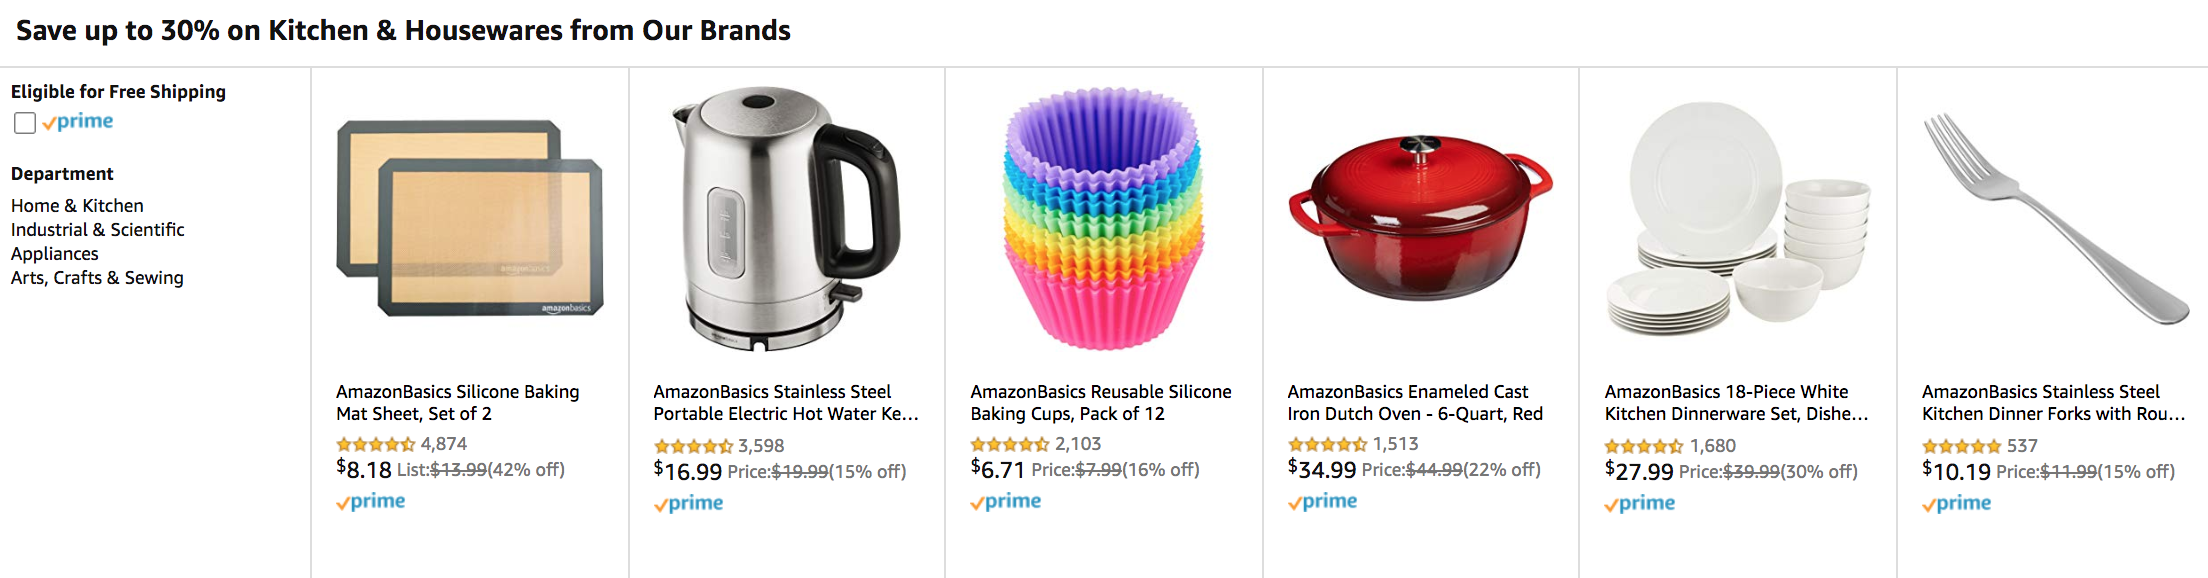 Amazon is offering sale prices on many household items.